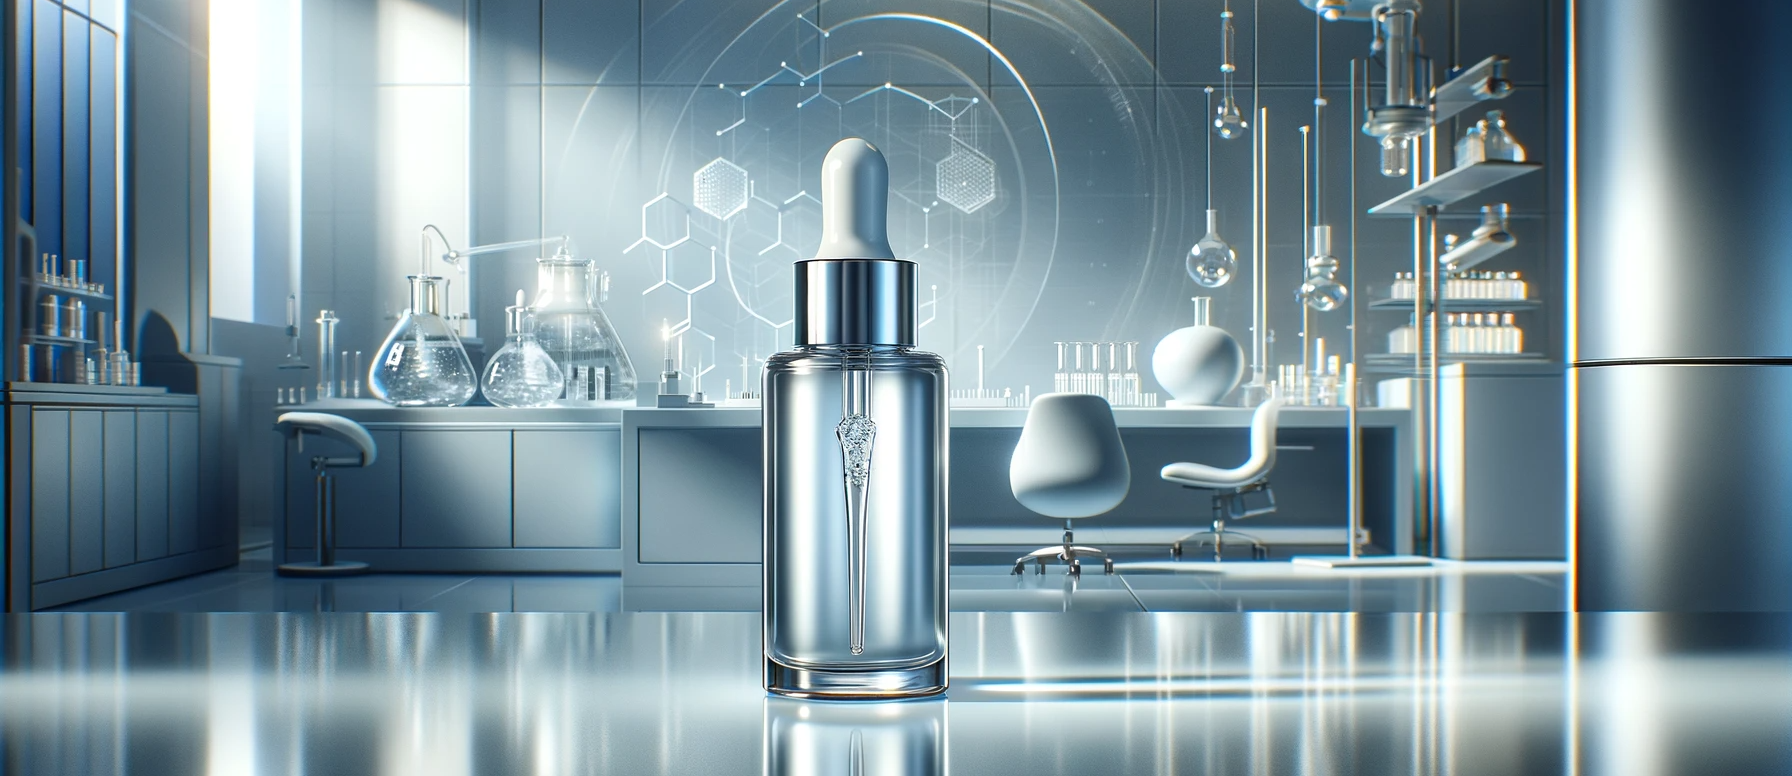 Modern laboratory showcasing a hyaluronic acid serum in an elegant glass bottle, set against high-tech equipment. The image has a sleek, professional design with a calming blue, white, and silver color palette, emphasizing advanced skincare science.